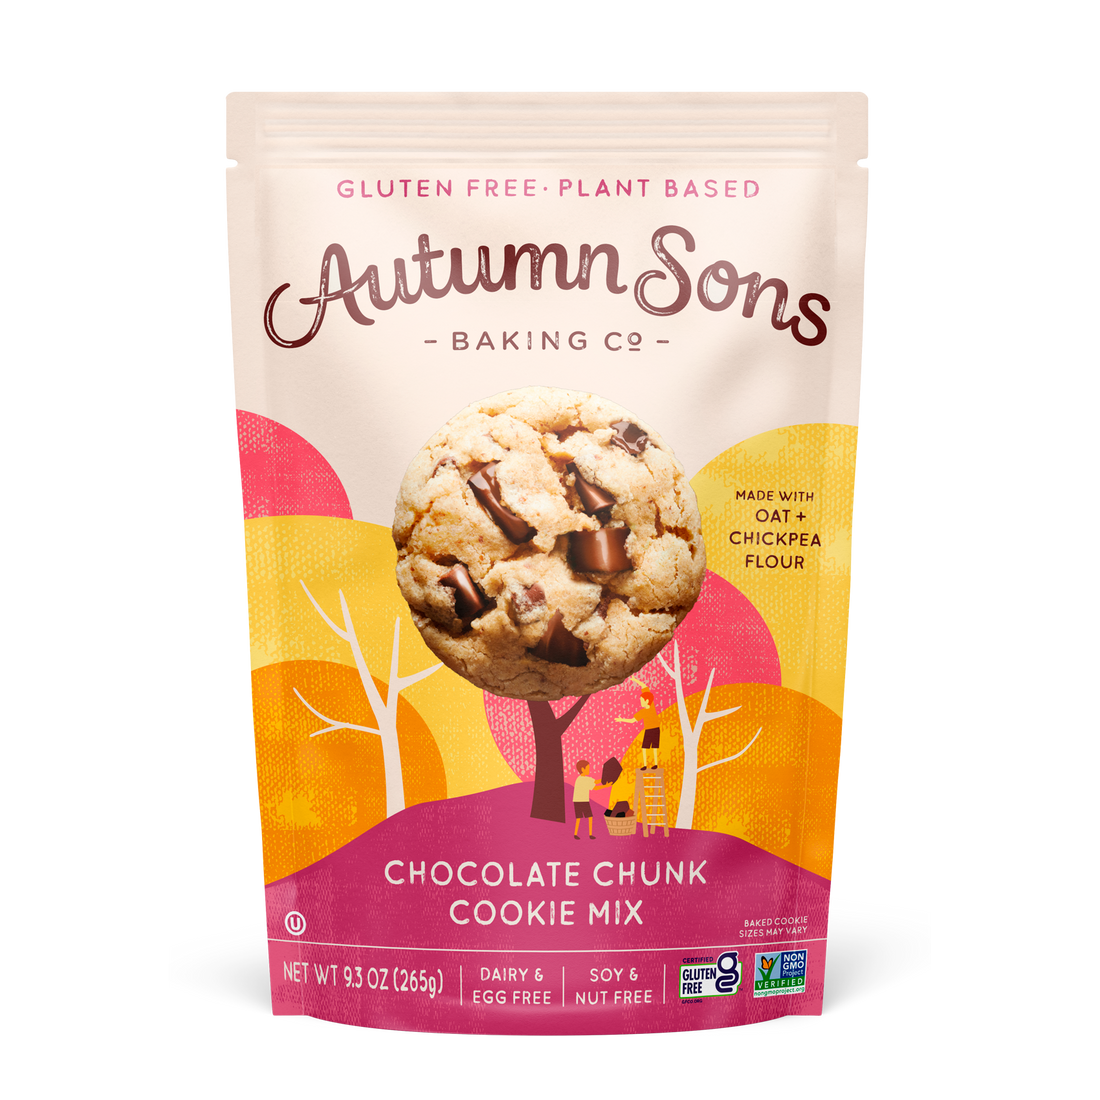 Chocolate Chunk Cookie Mix – Autumn Sons Baking Co.